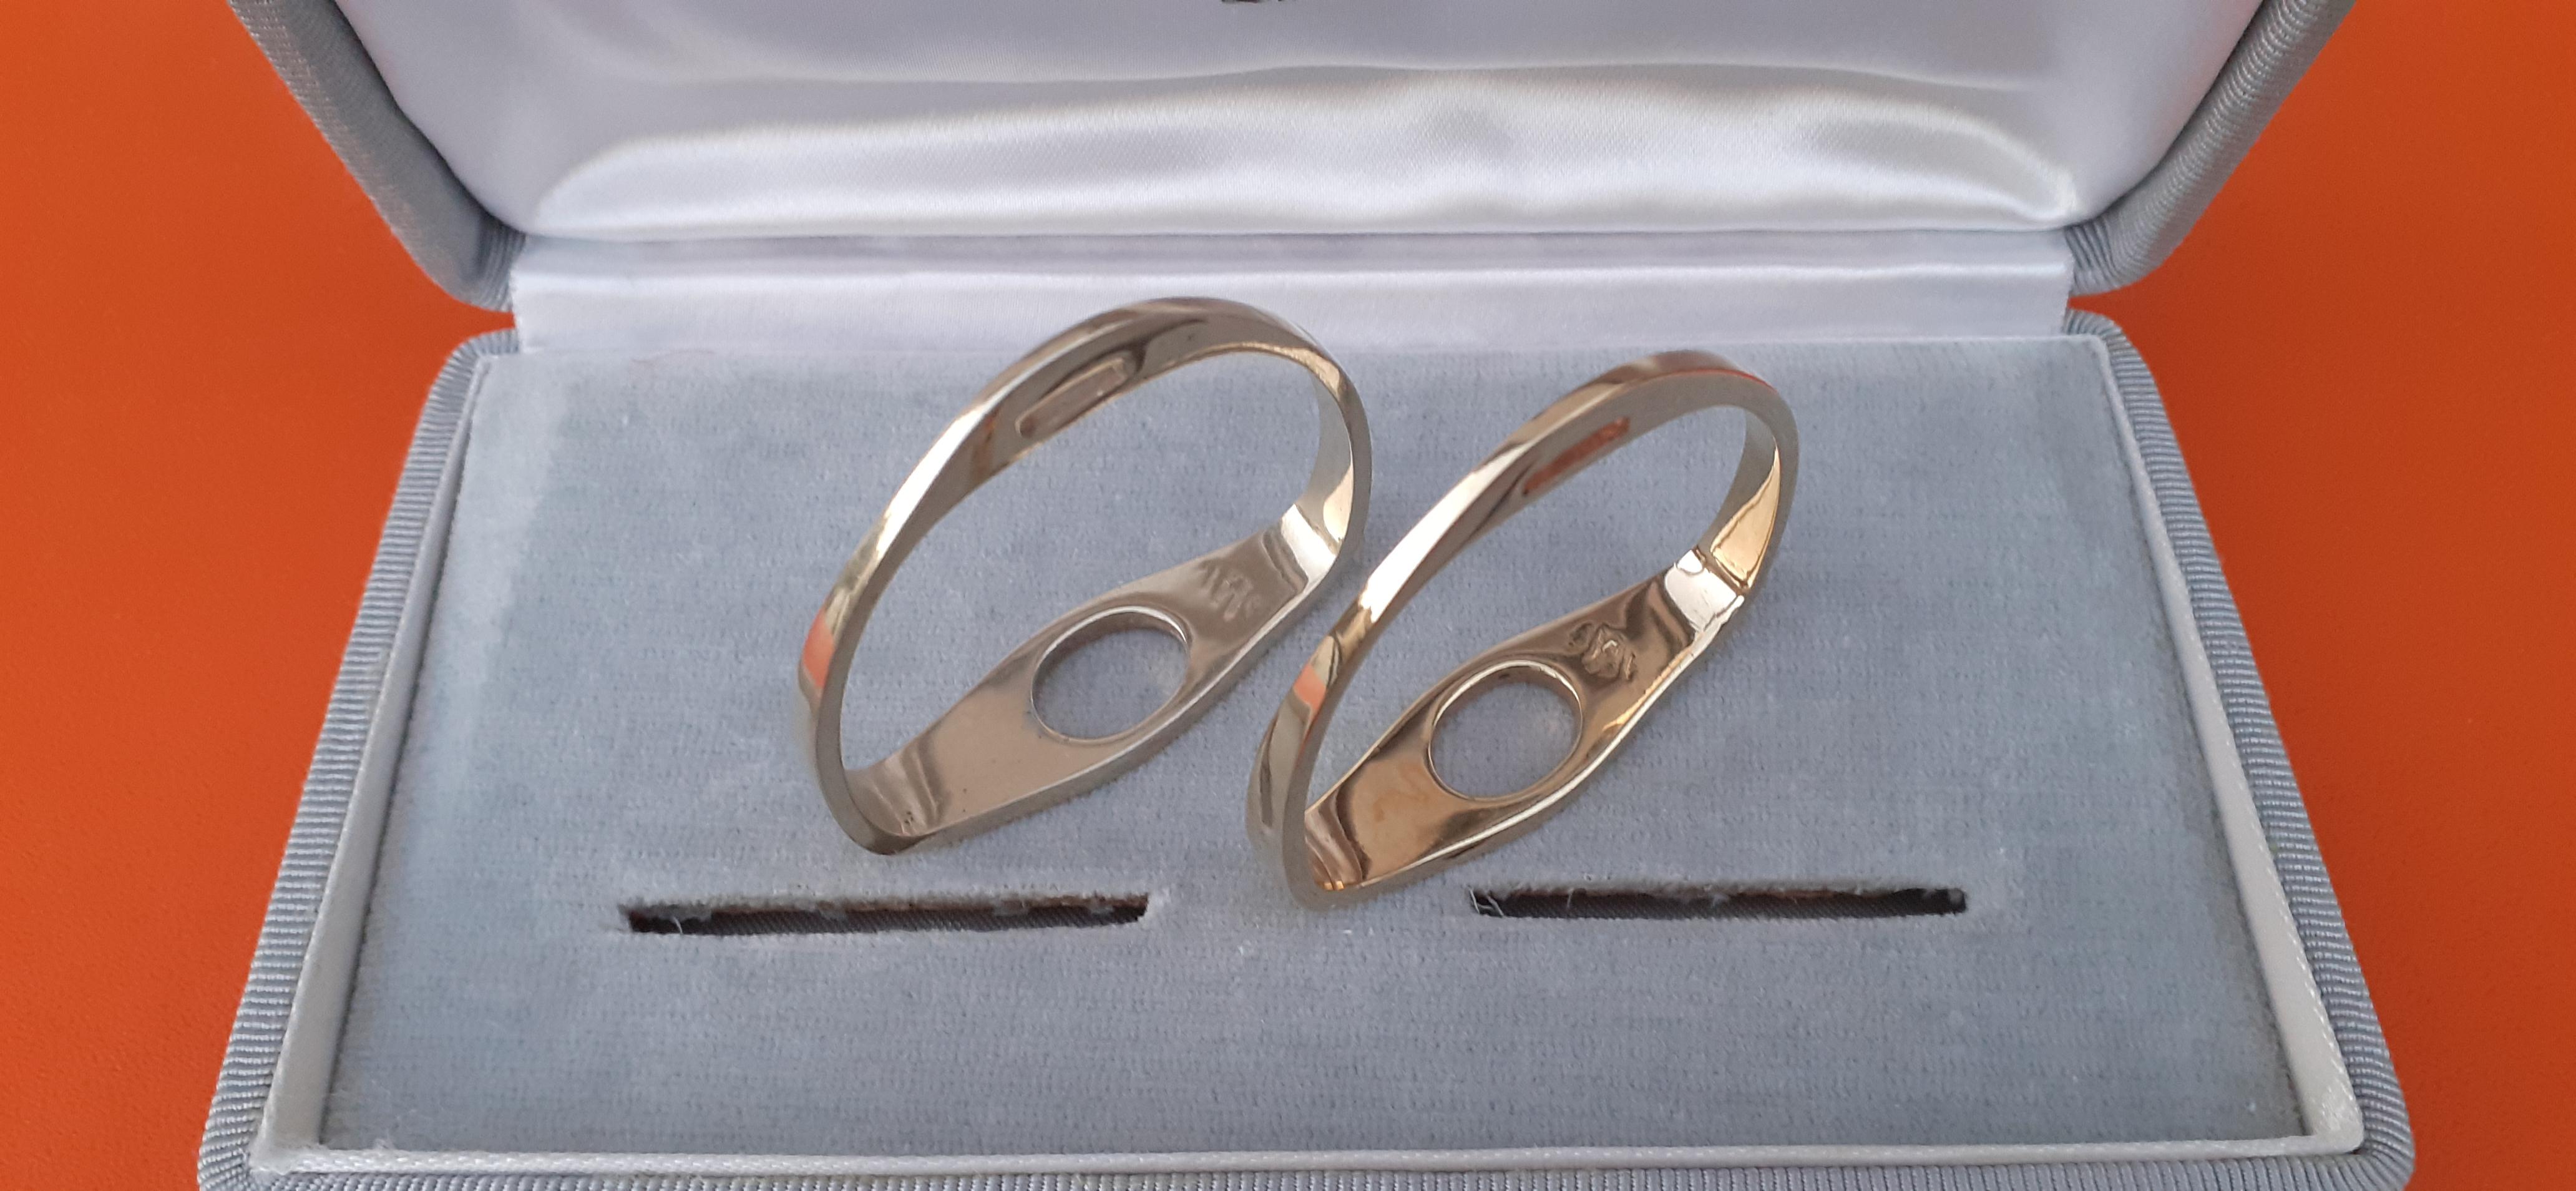 Exceptional Hermès Set of 2 Napkin Rings Stirrups Shaped in Silver-Gilt Texas For Sale 10